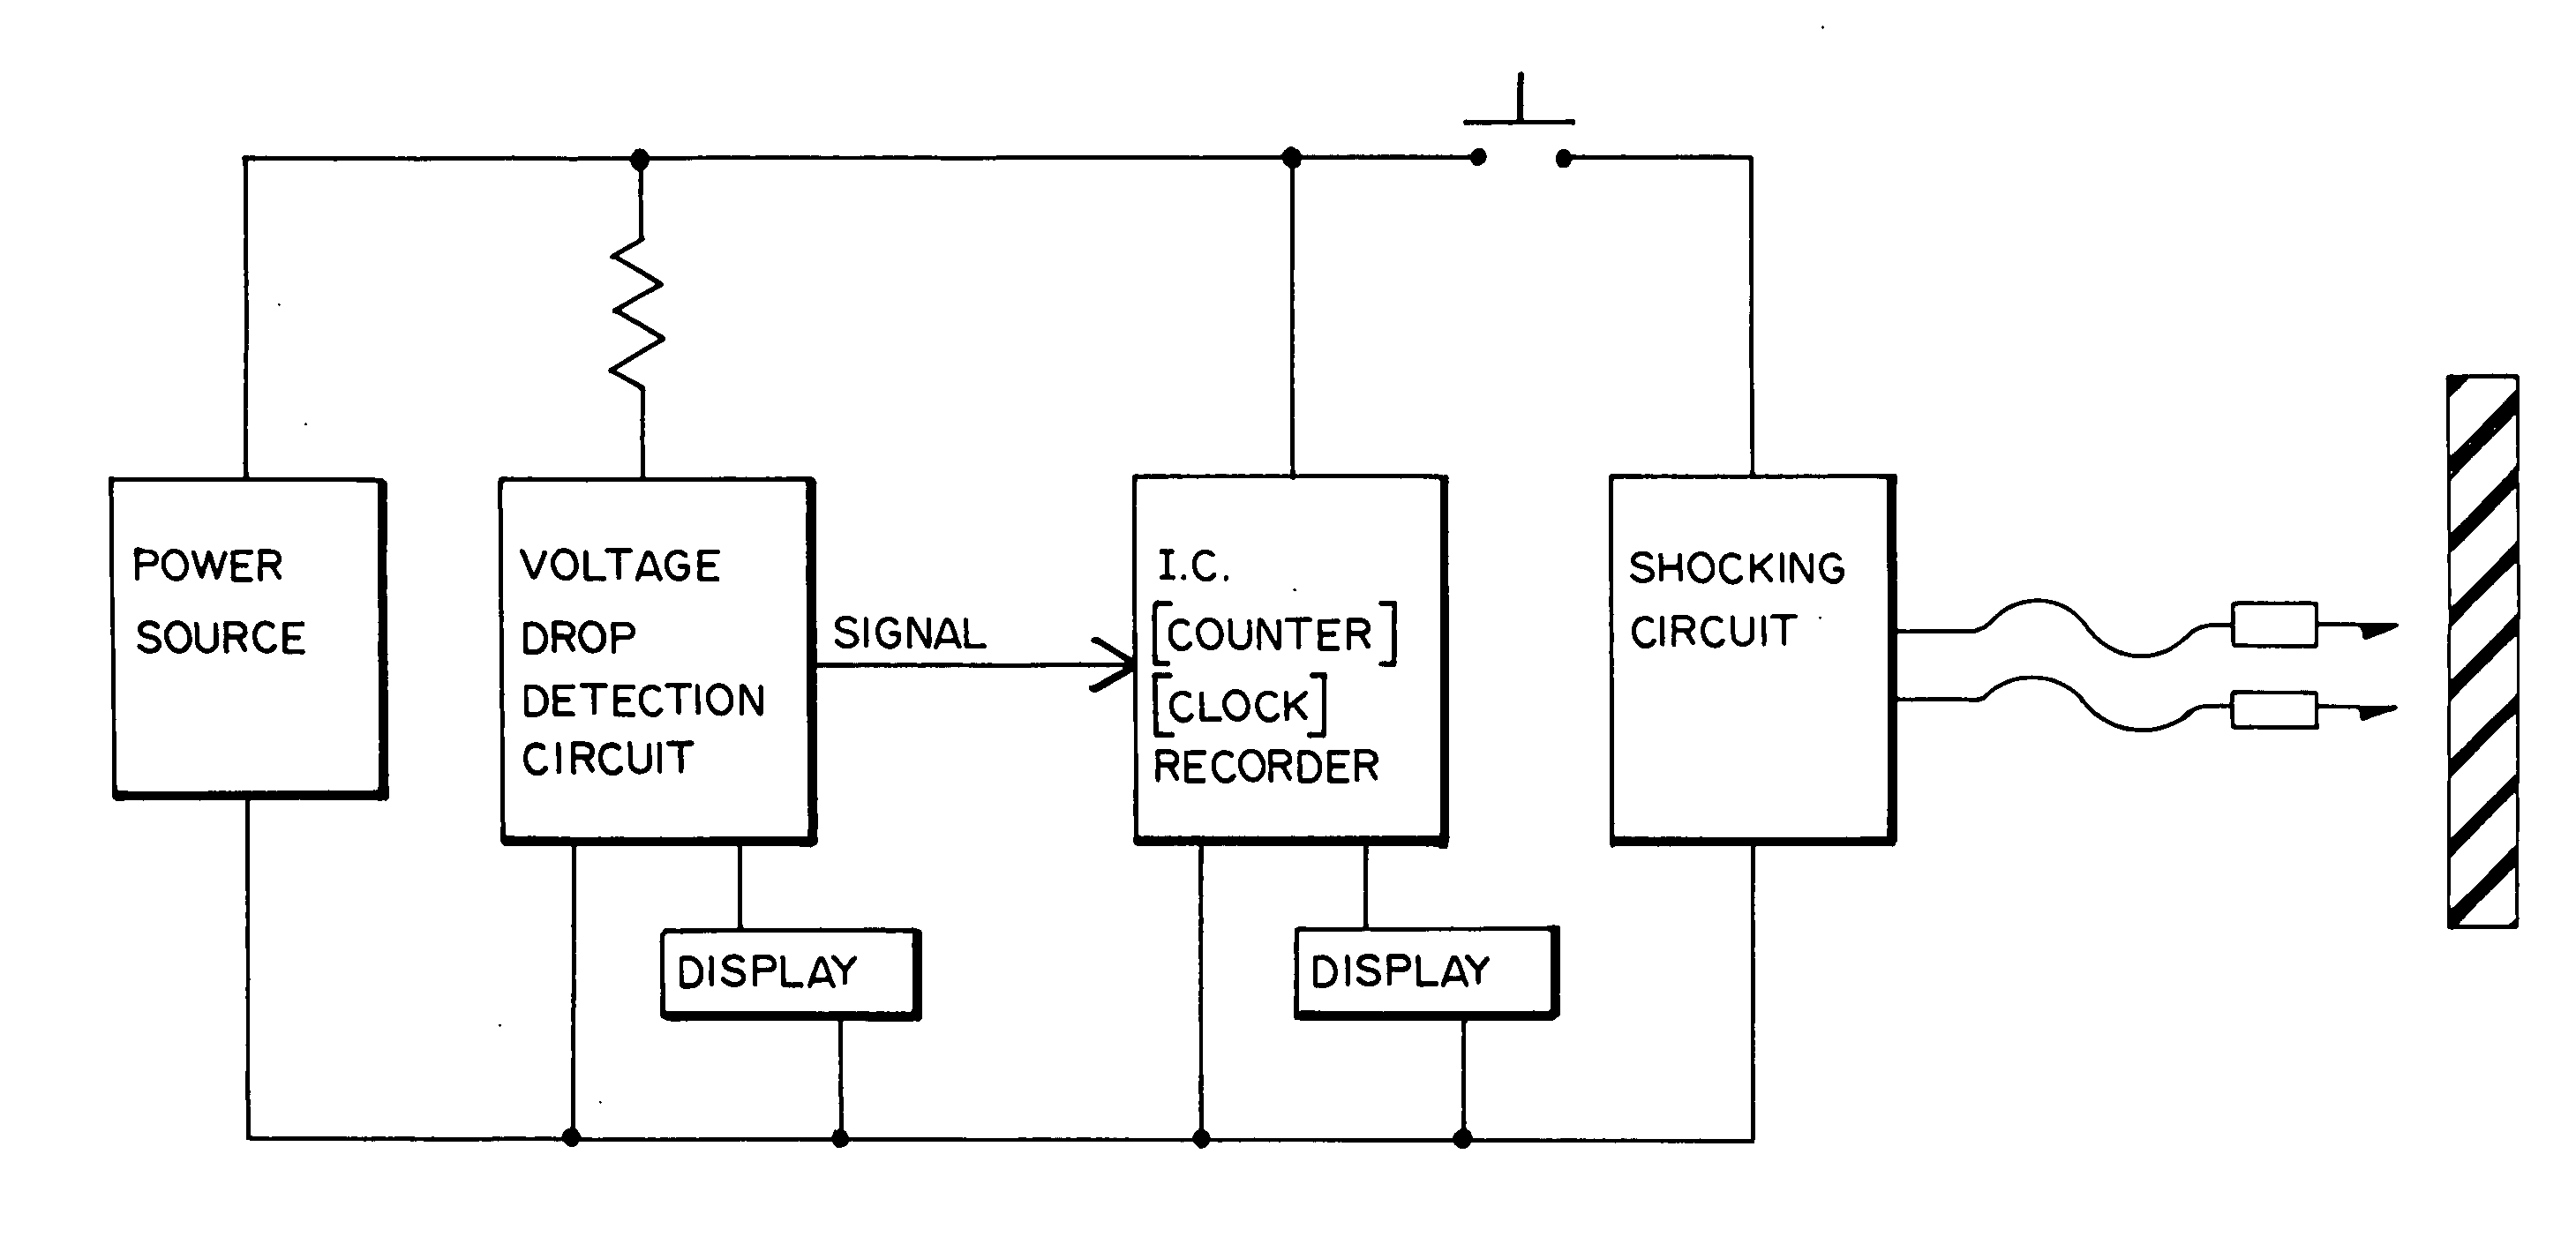 Shocking device having a time-based monitoring and recording circuit